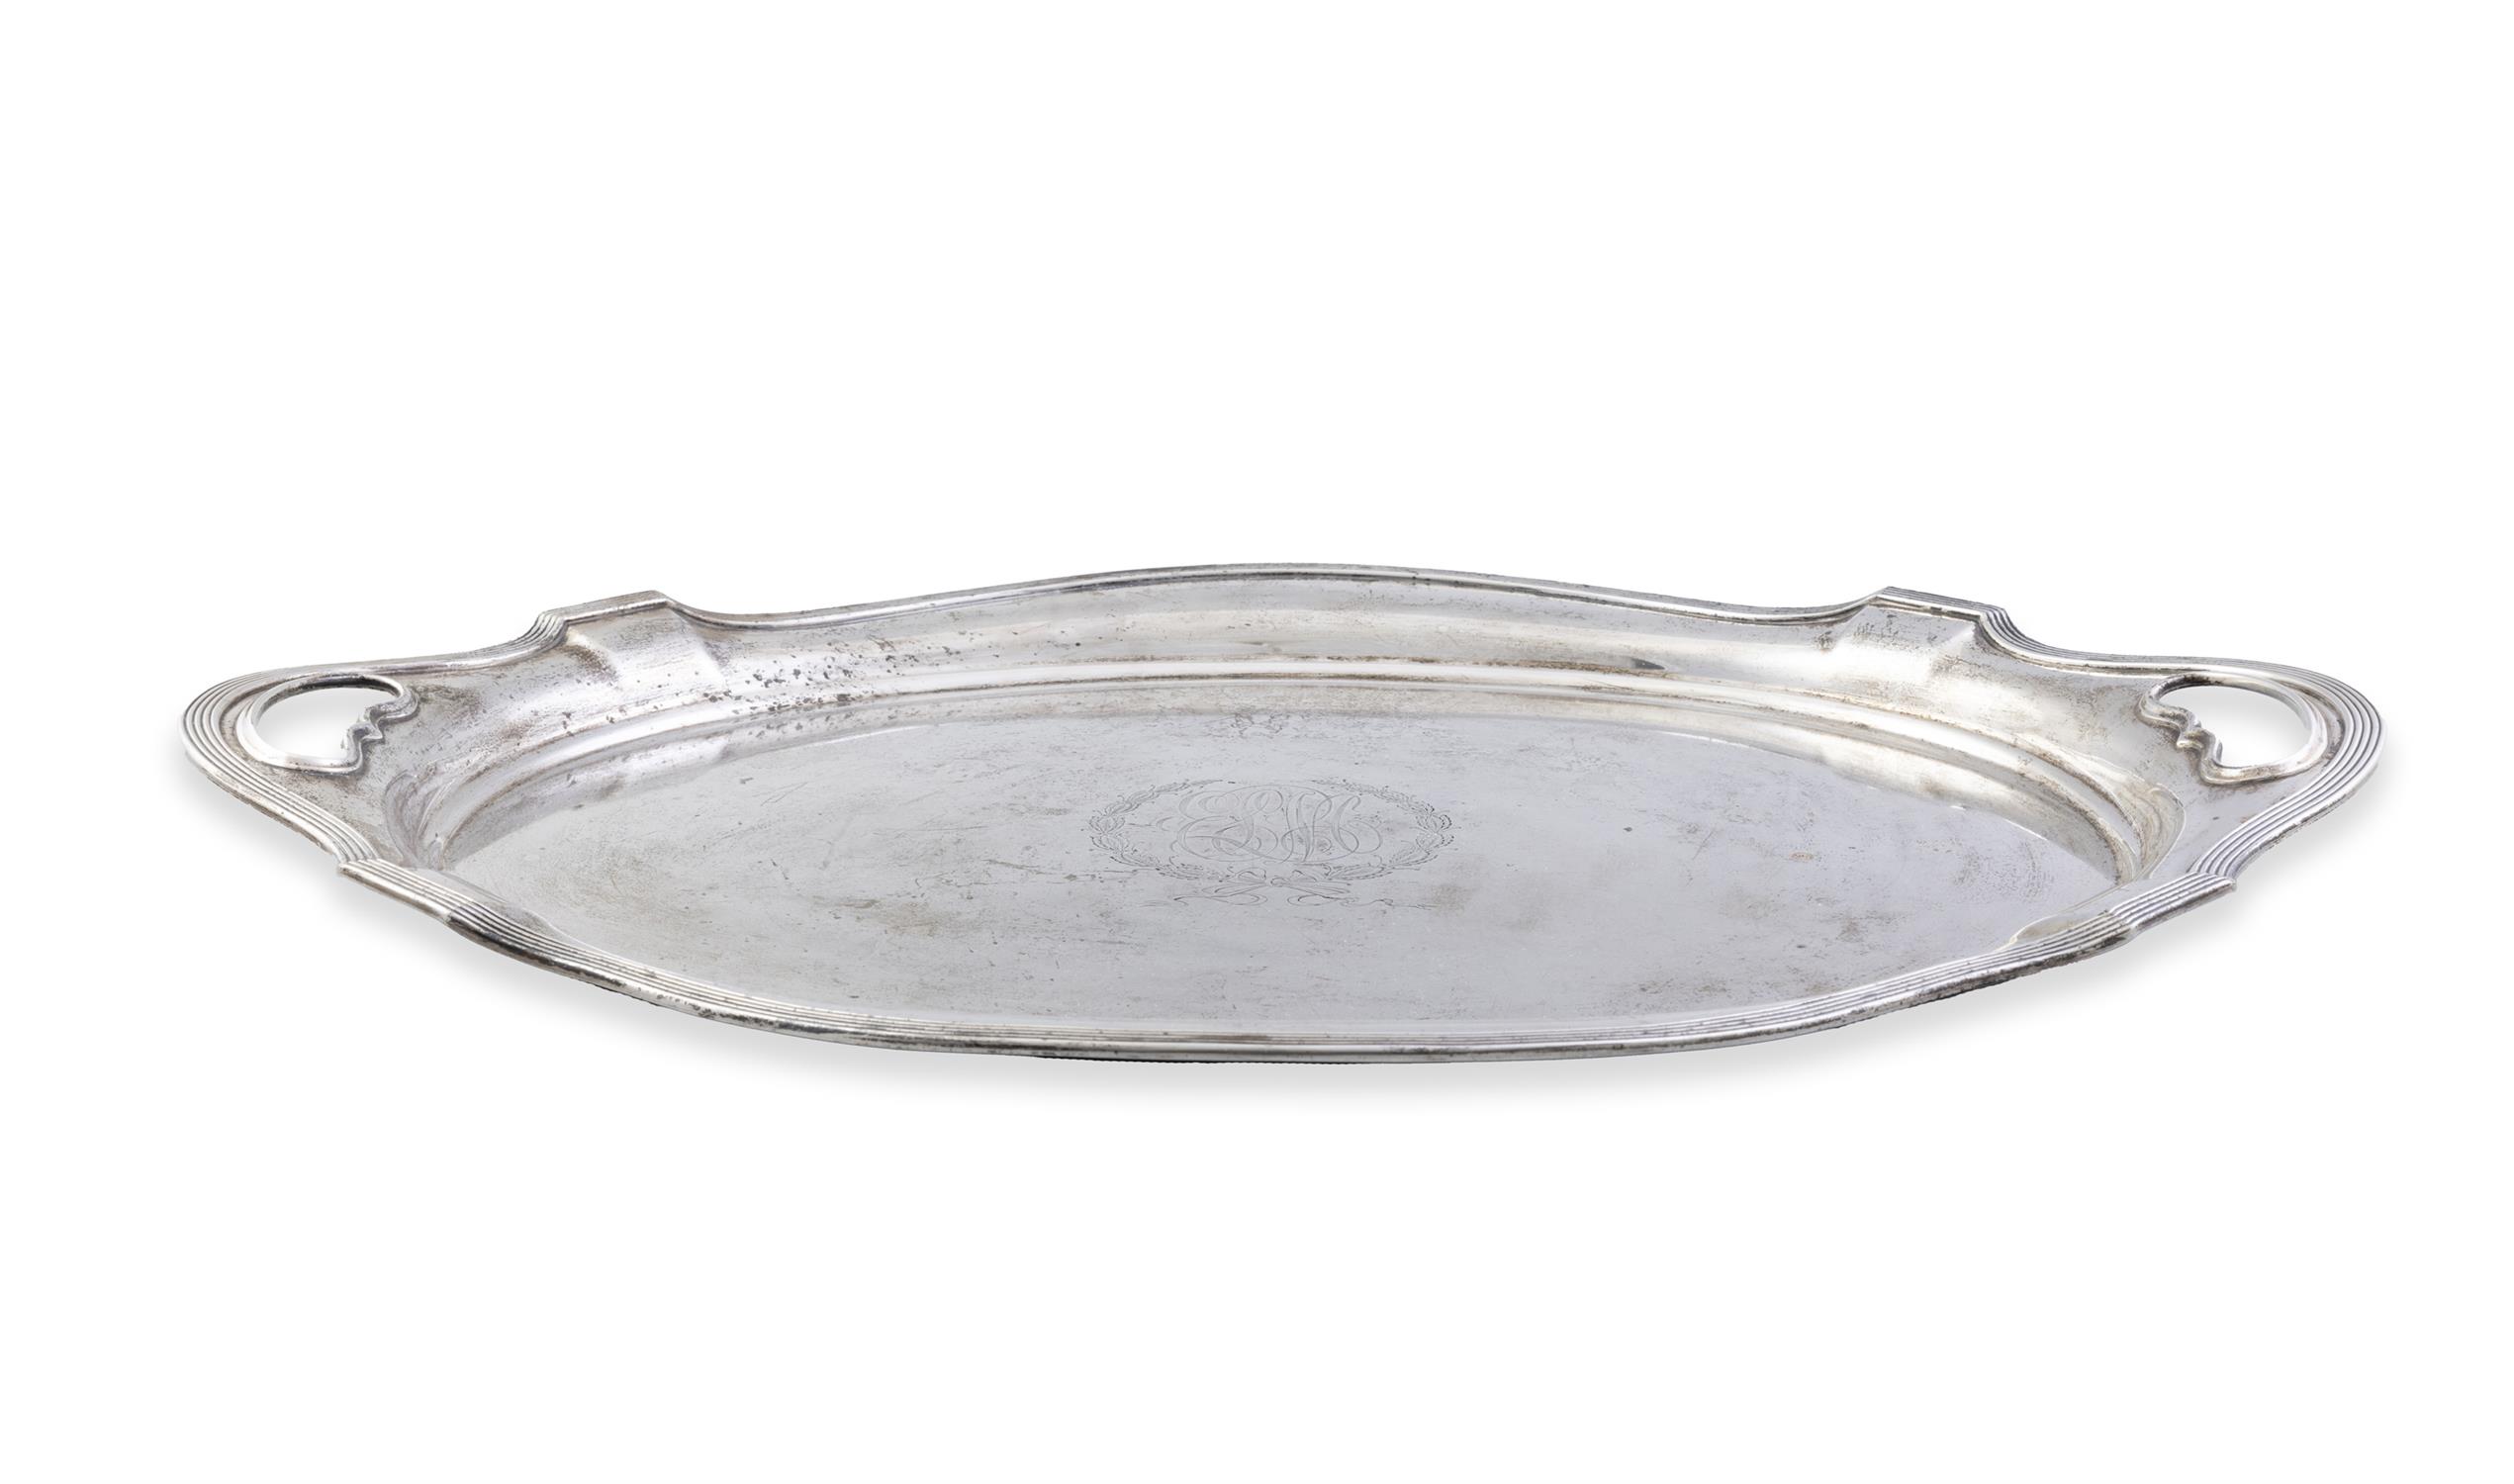 A LARGE AMERICAN SILVER TWO HANDLED SERVING TRAY retailers mark for 'J.E. Caldwell & Co.